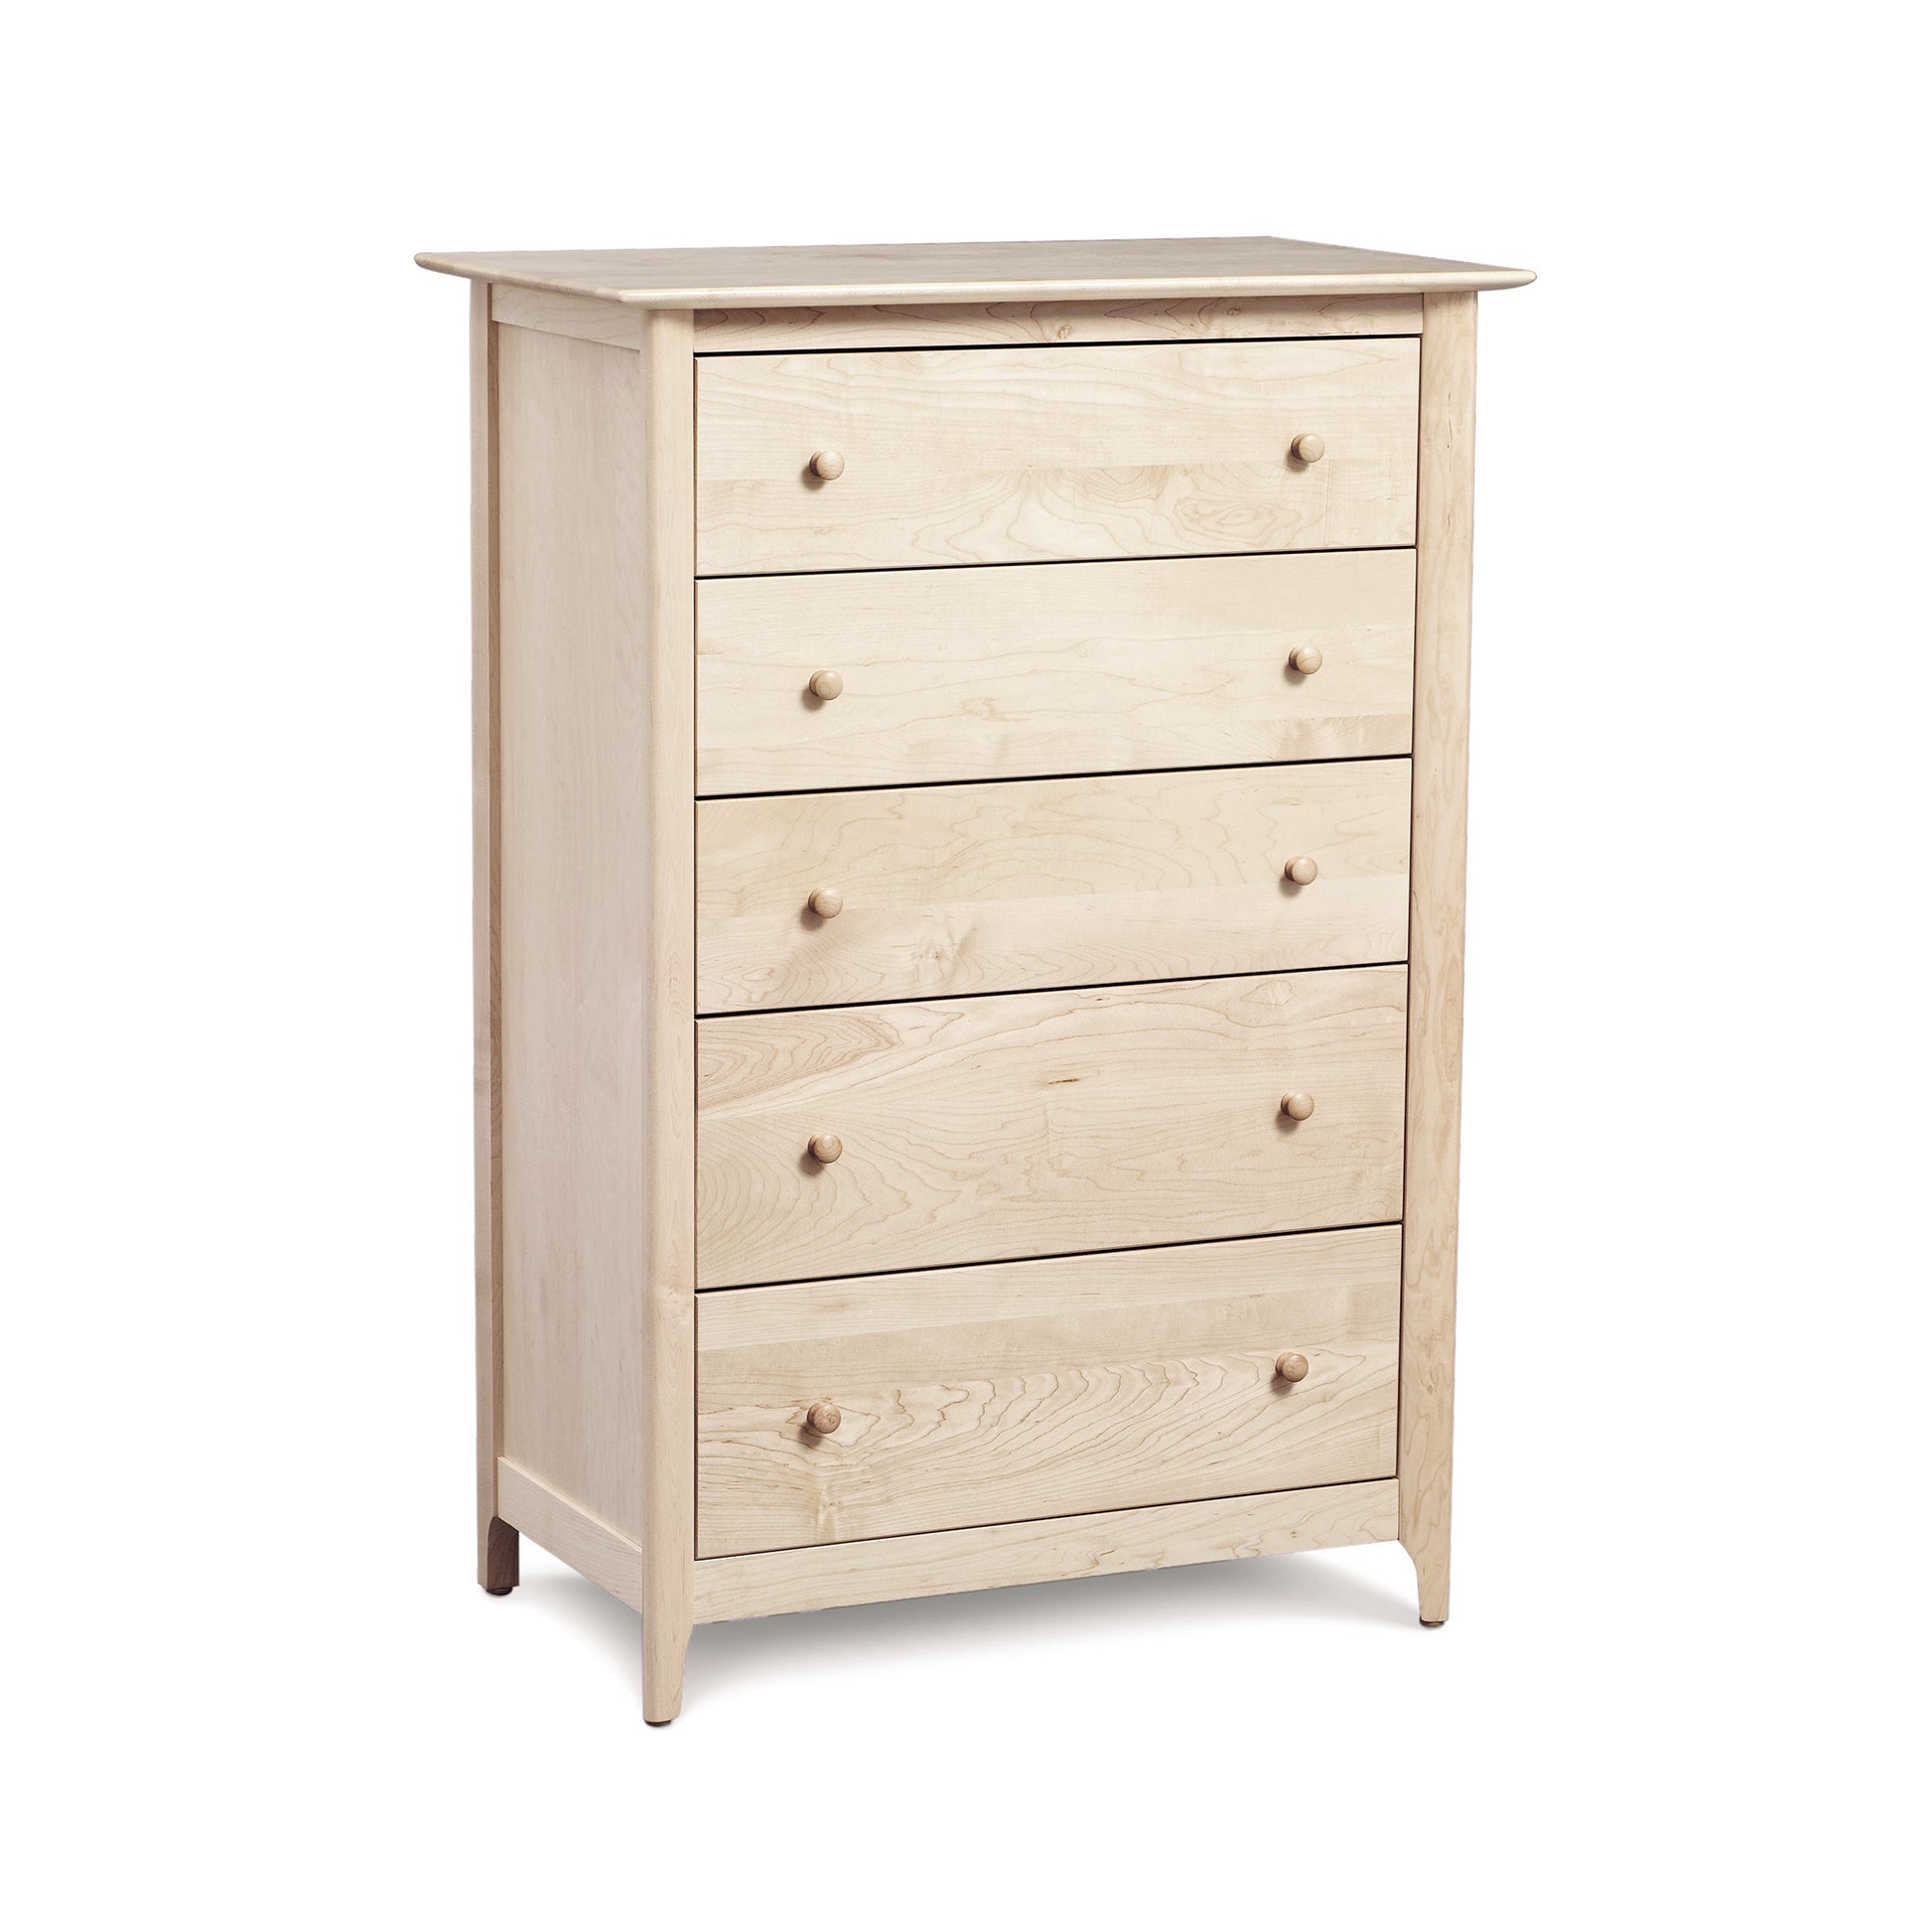 A Sarah 5-Drawer Chest in natural cherry wood with round knobs, isolated on a white background by Copeland Furniture.